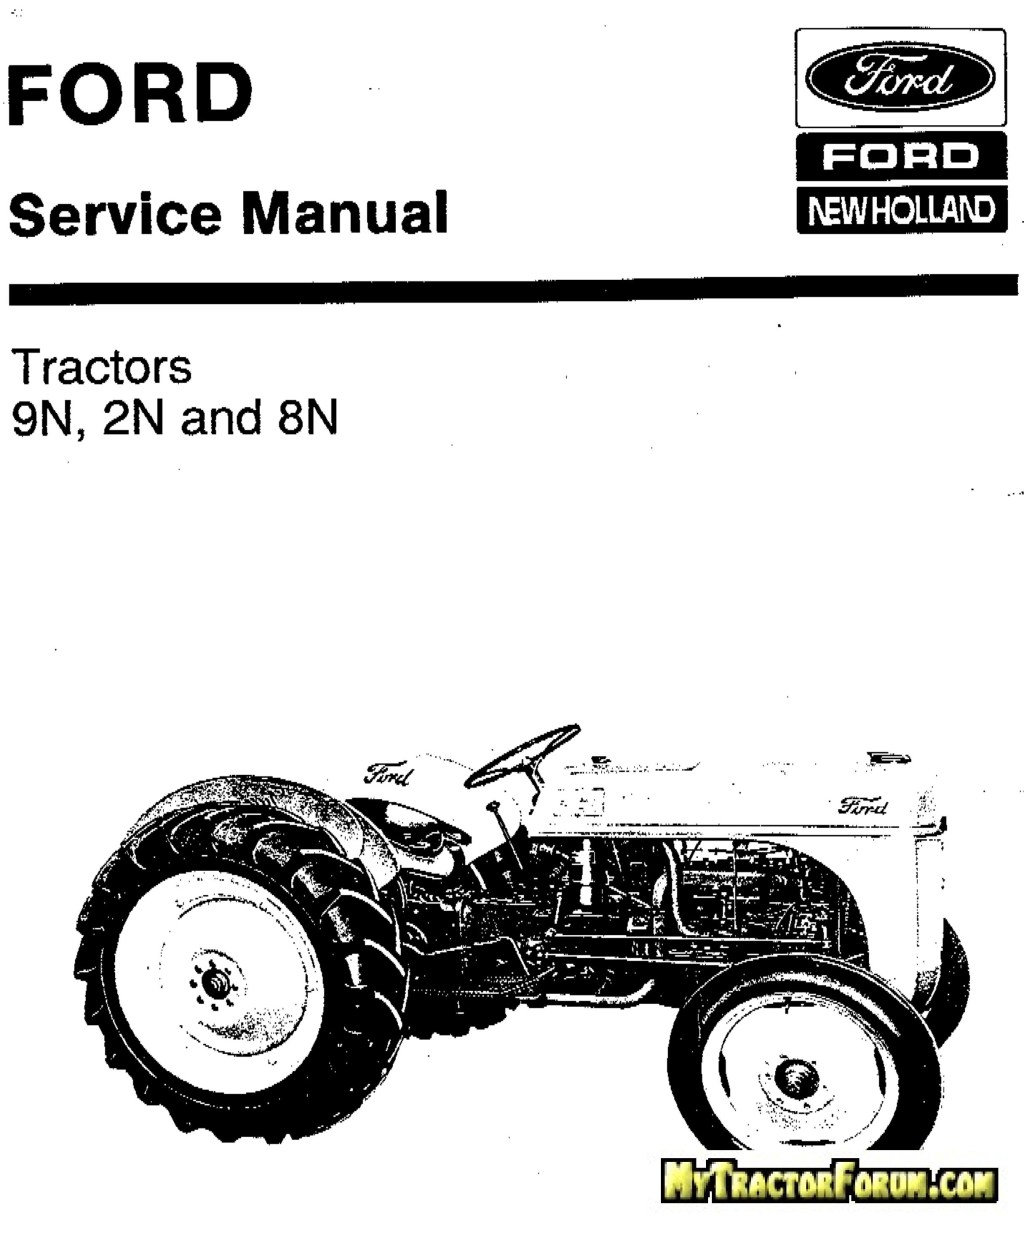 Picture of: Ford n n n New Holland Service Manual by NathanHardenj – Issuu